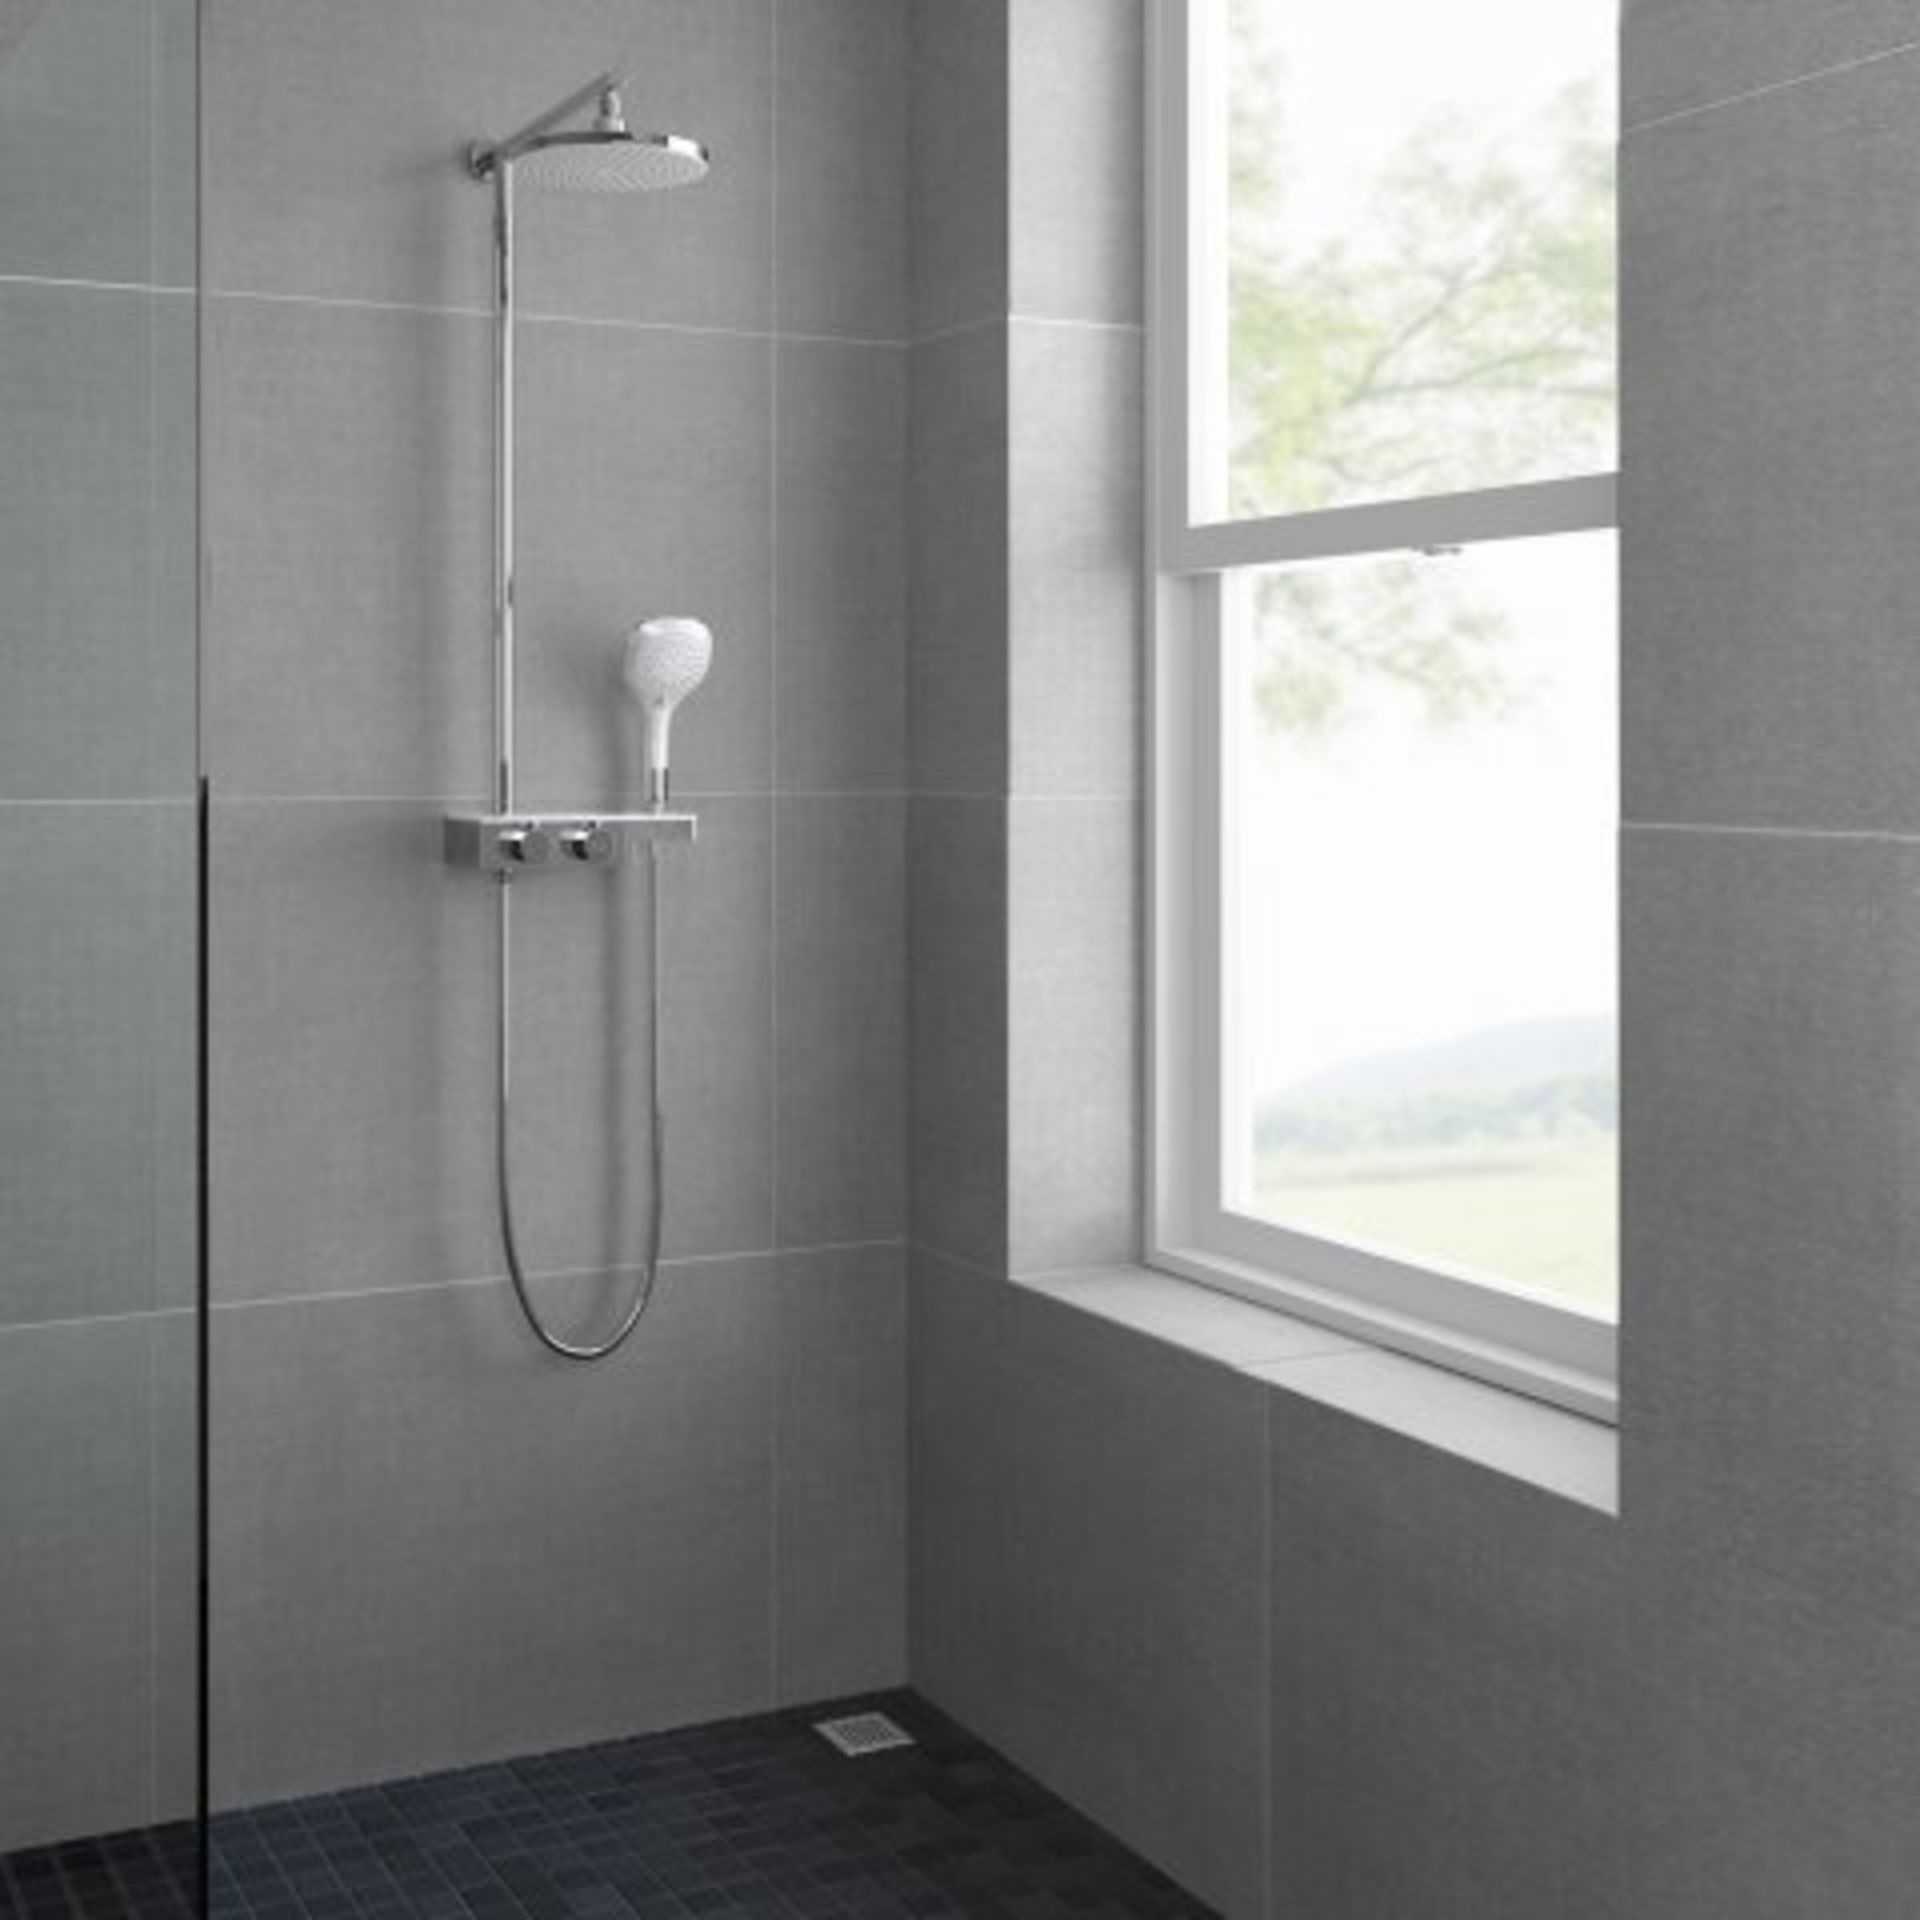 (I53) Round Exposed Thermostatic Mixer Shower Kit, Large Shower Head & Shelf RRP £349.99 Flaunting a - Image 3 of 4